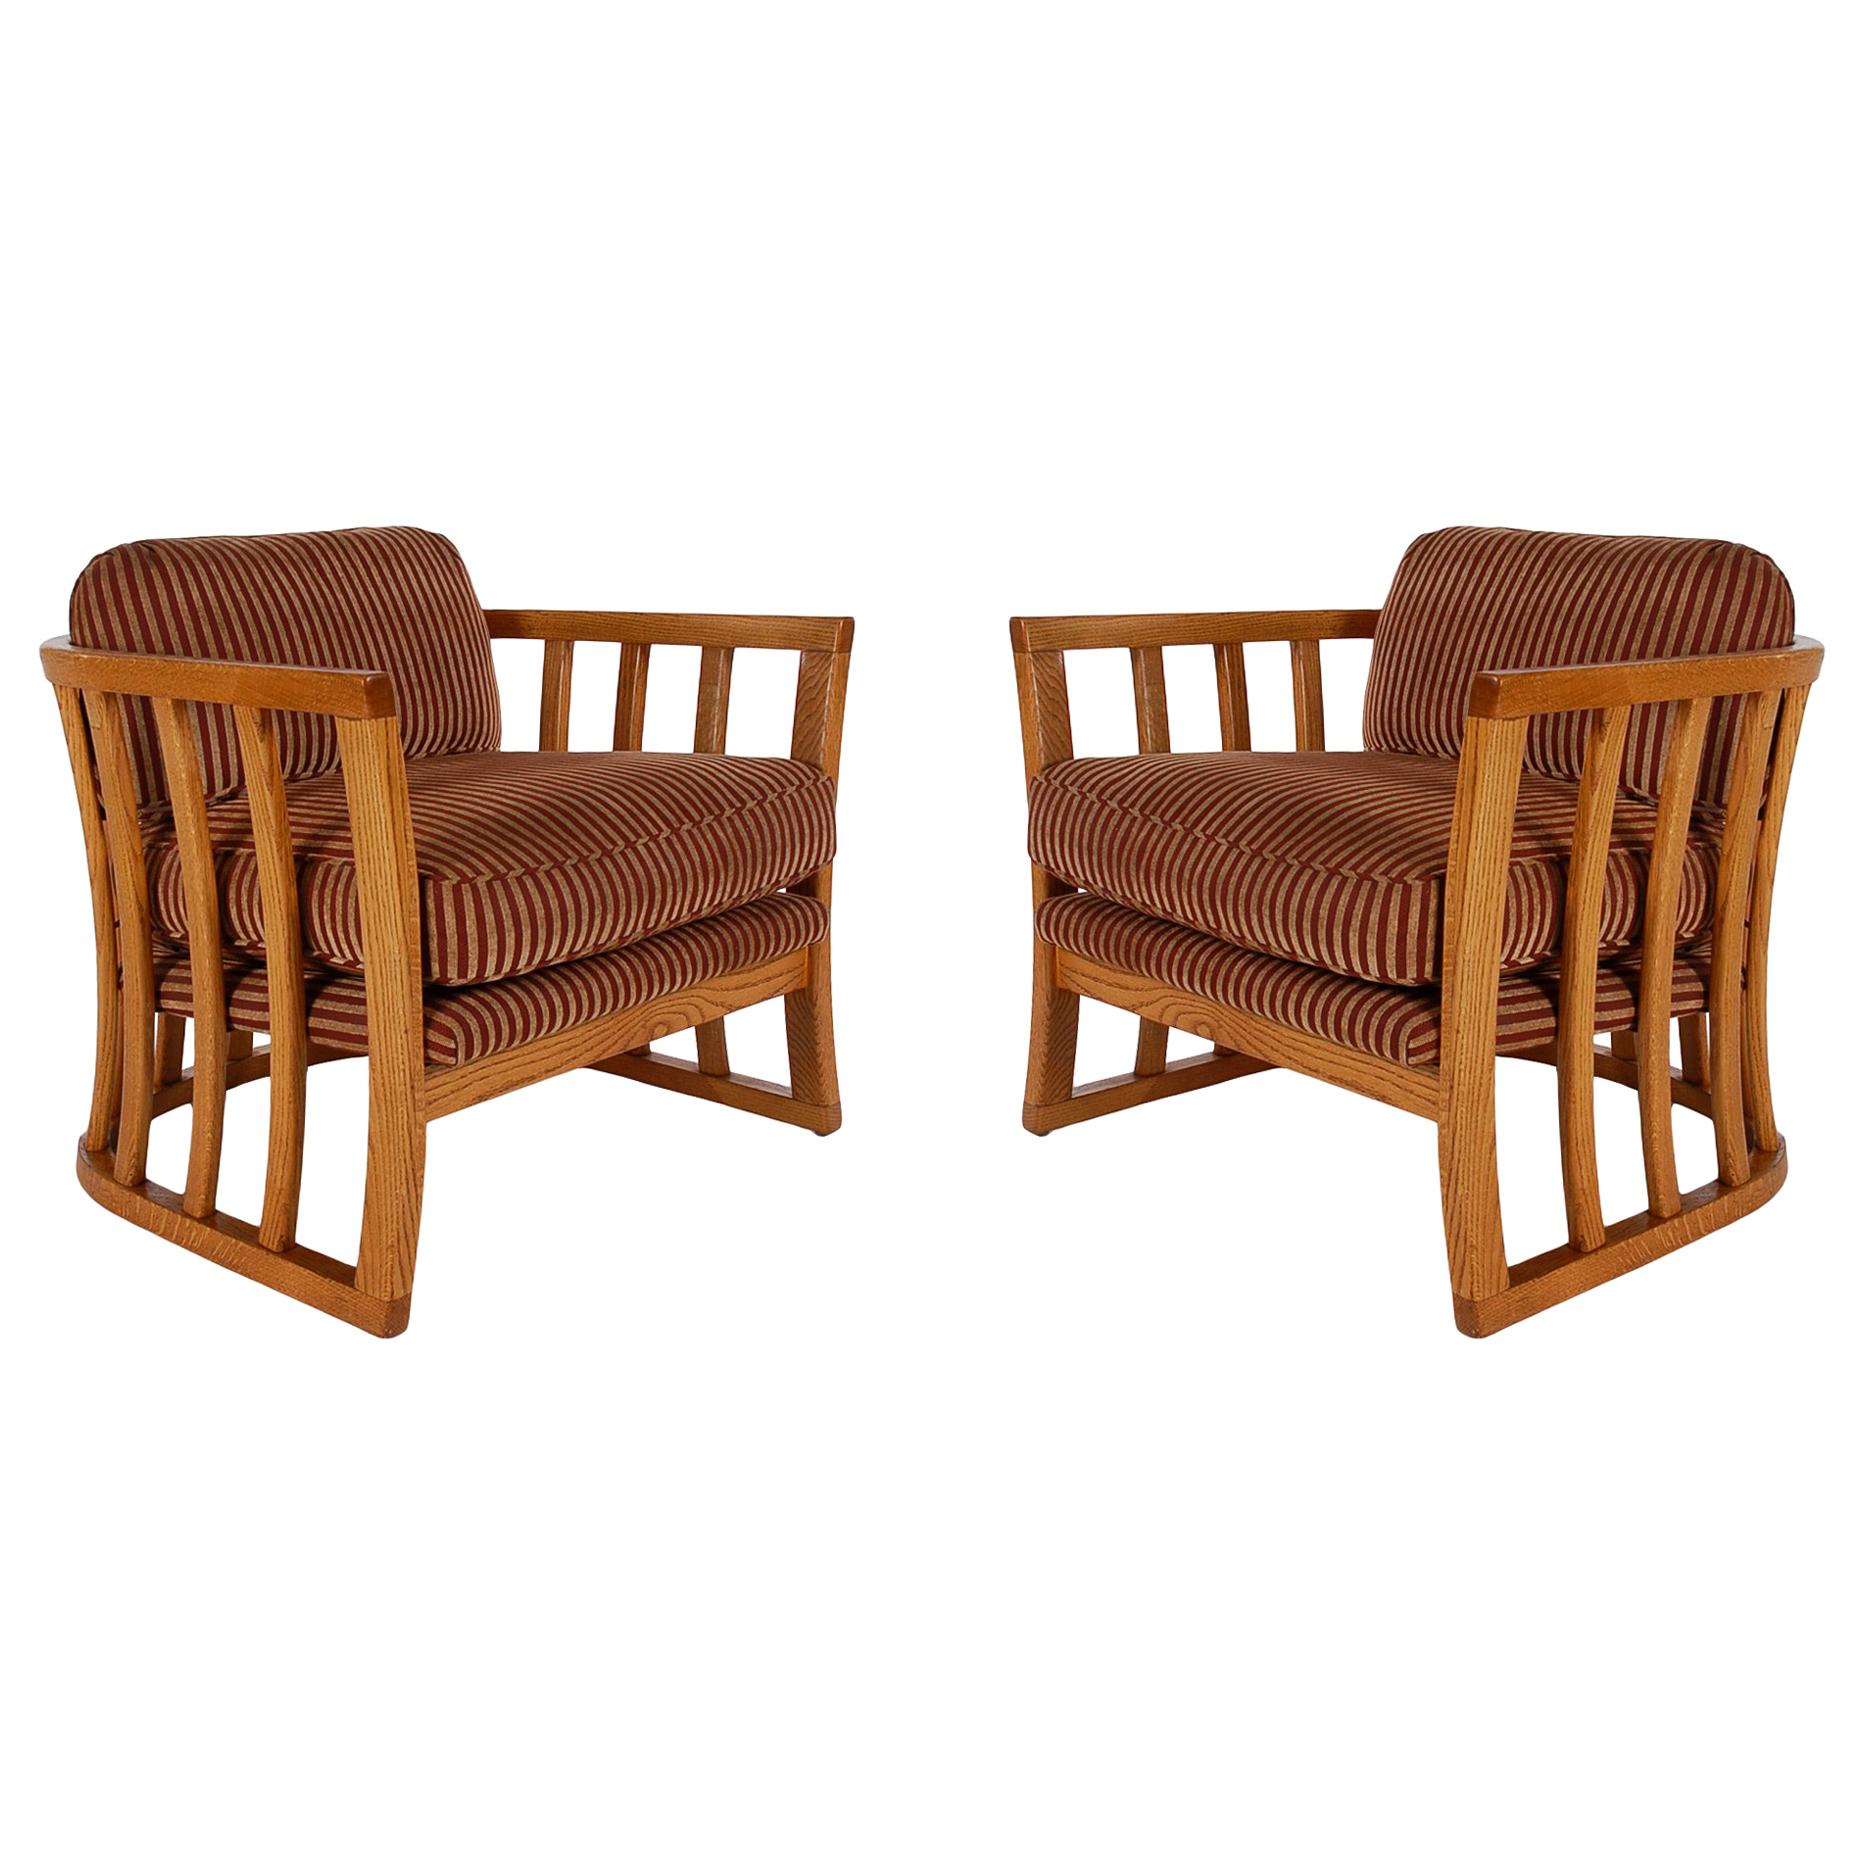 Matching Pair of Mid-Century Modern Spindle Back Barrel Lounge Chairs in Oak